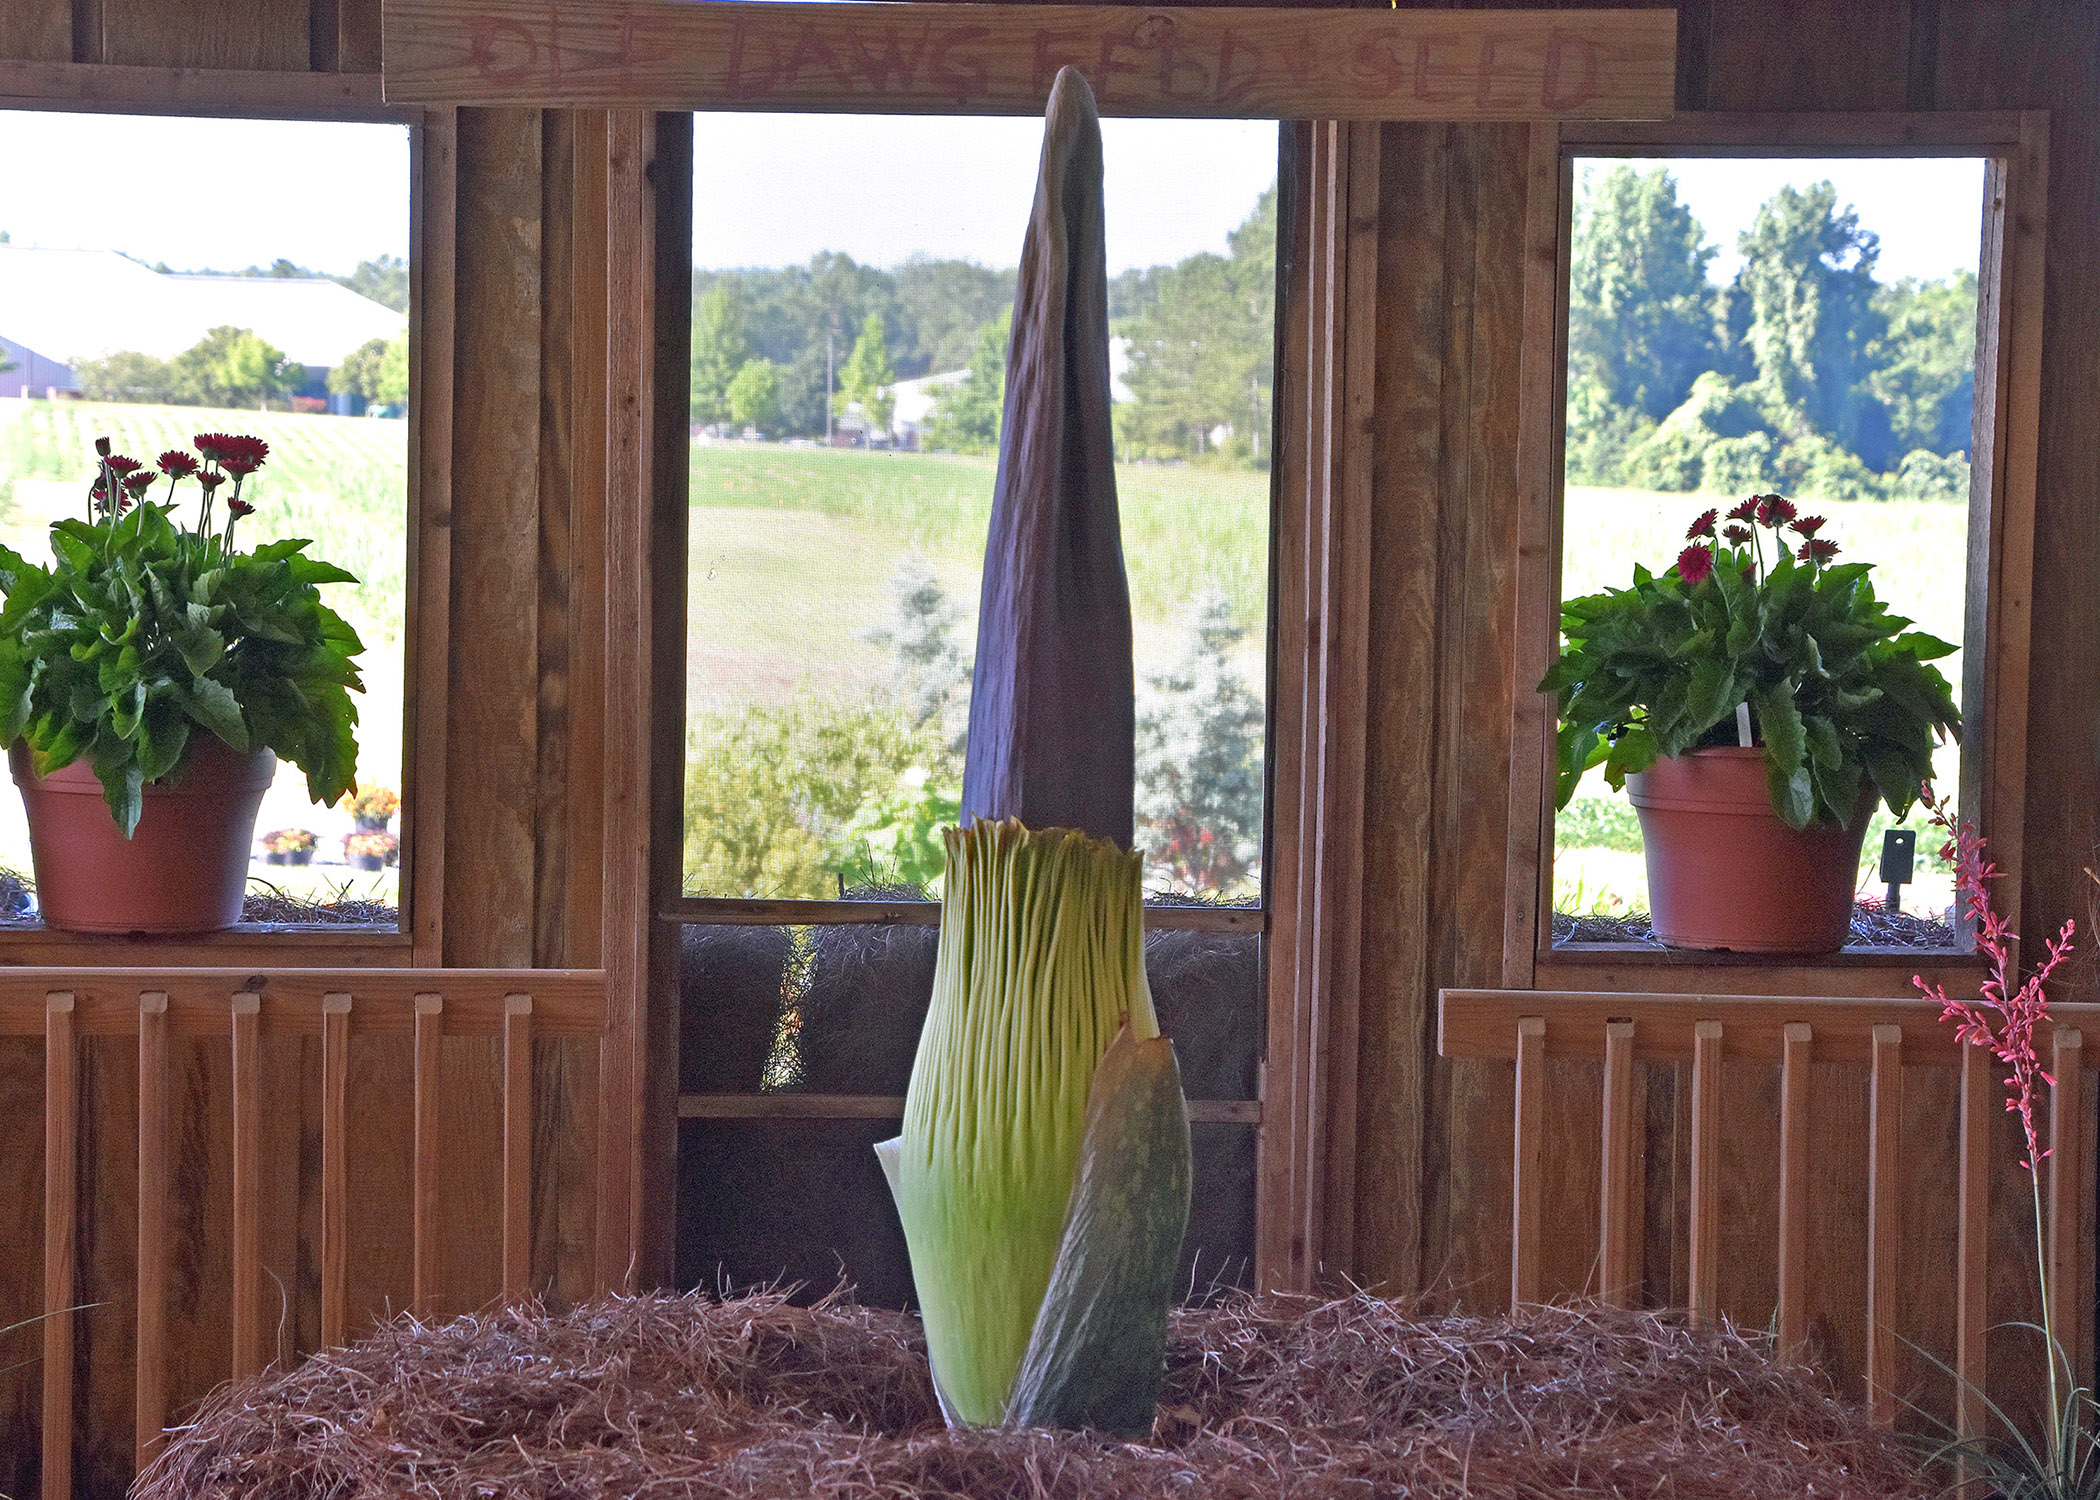 Spike is a 9-year-old, 63-inch-tall rare titan arum about to bloom.